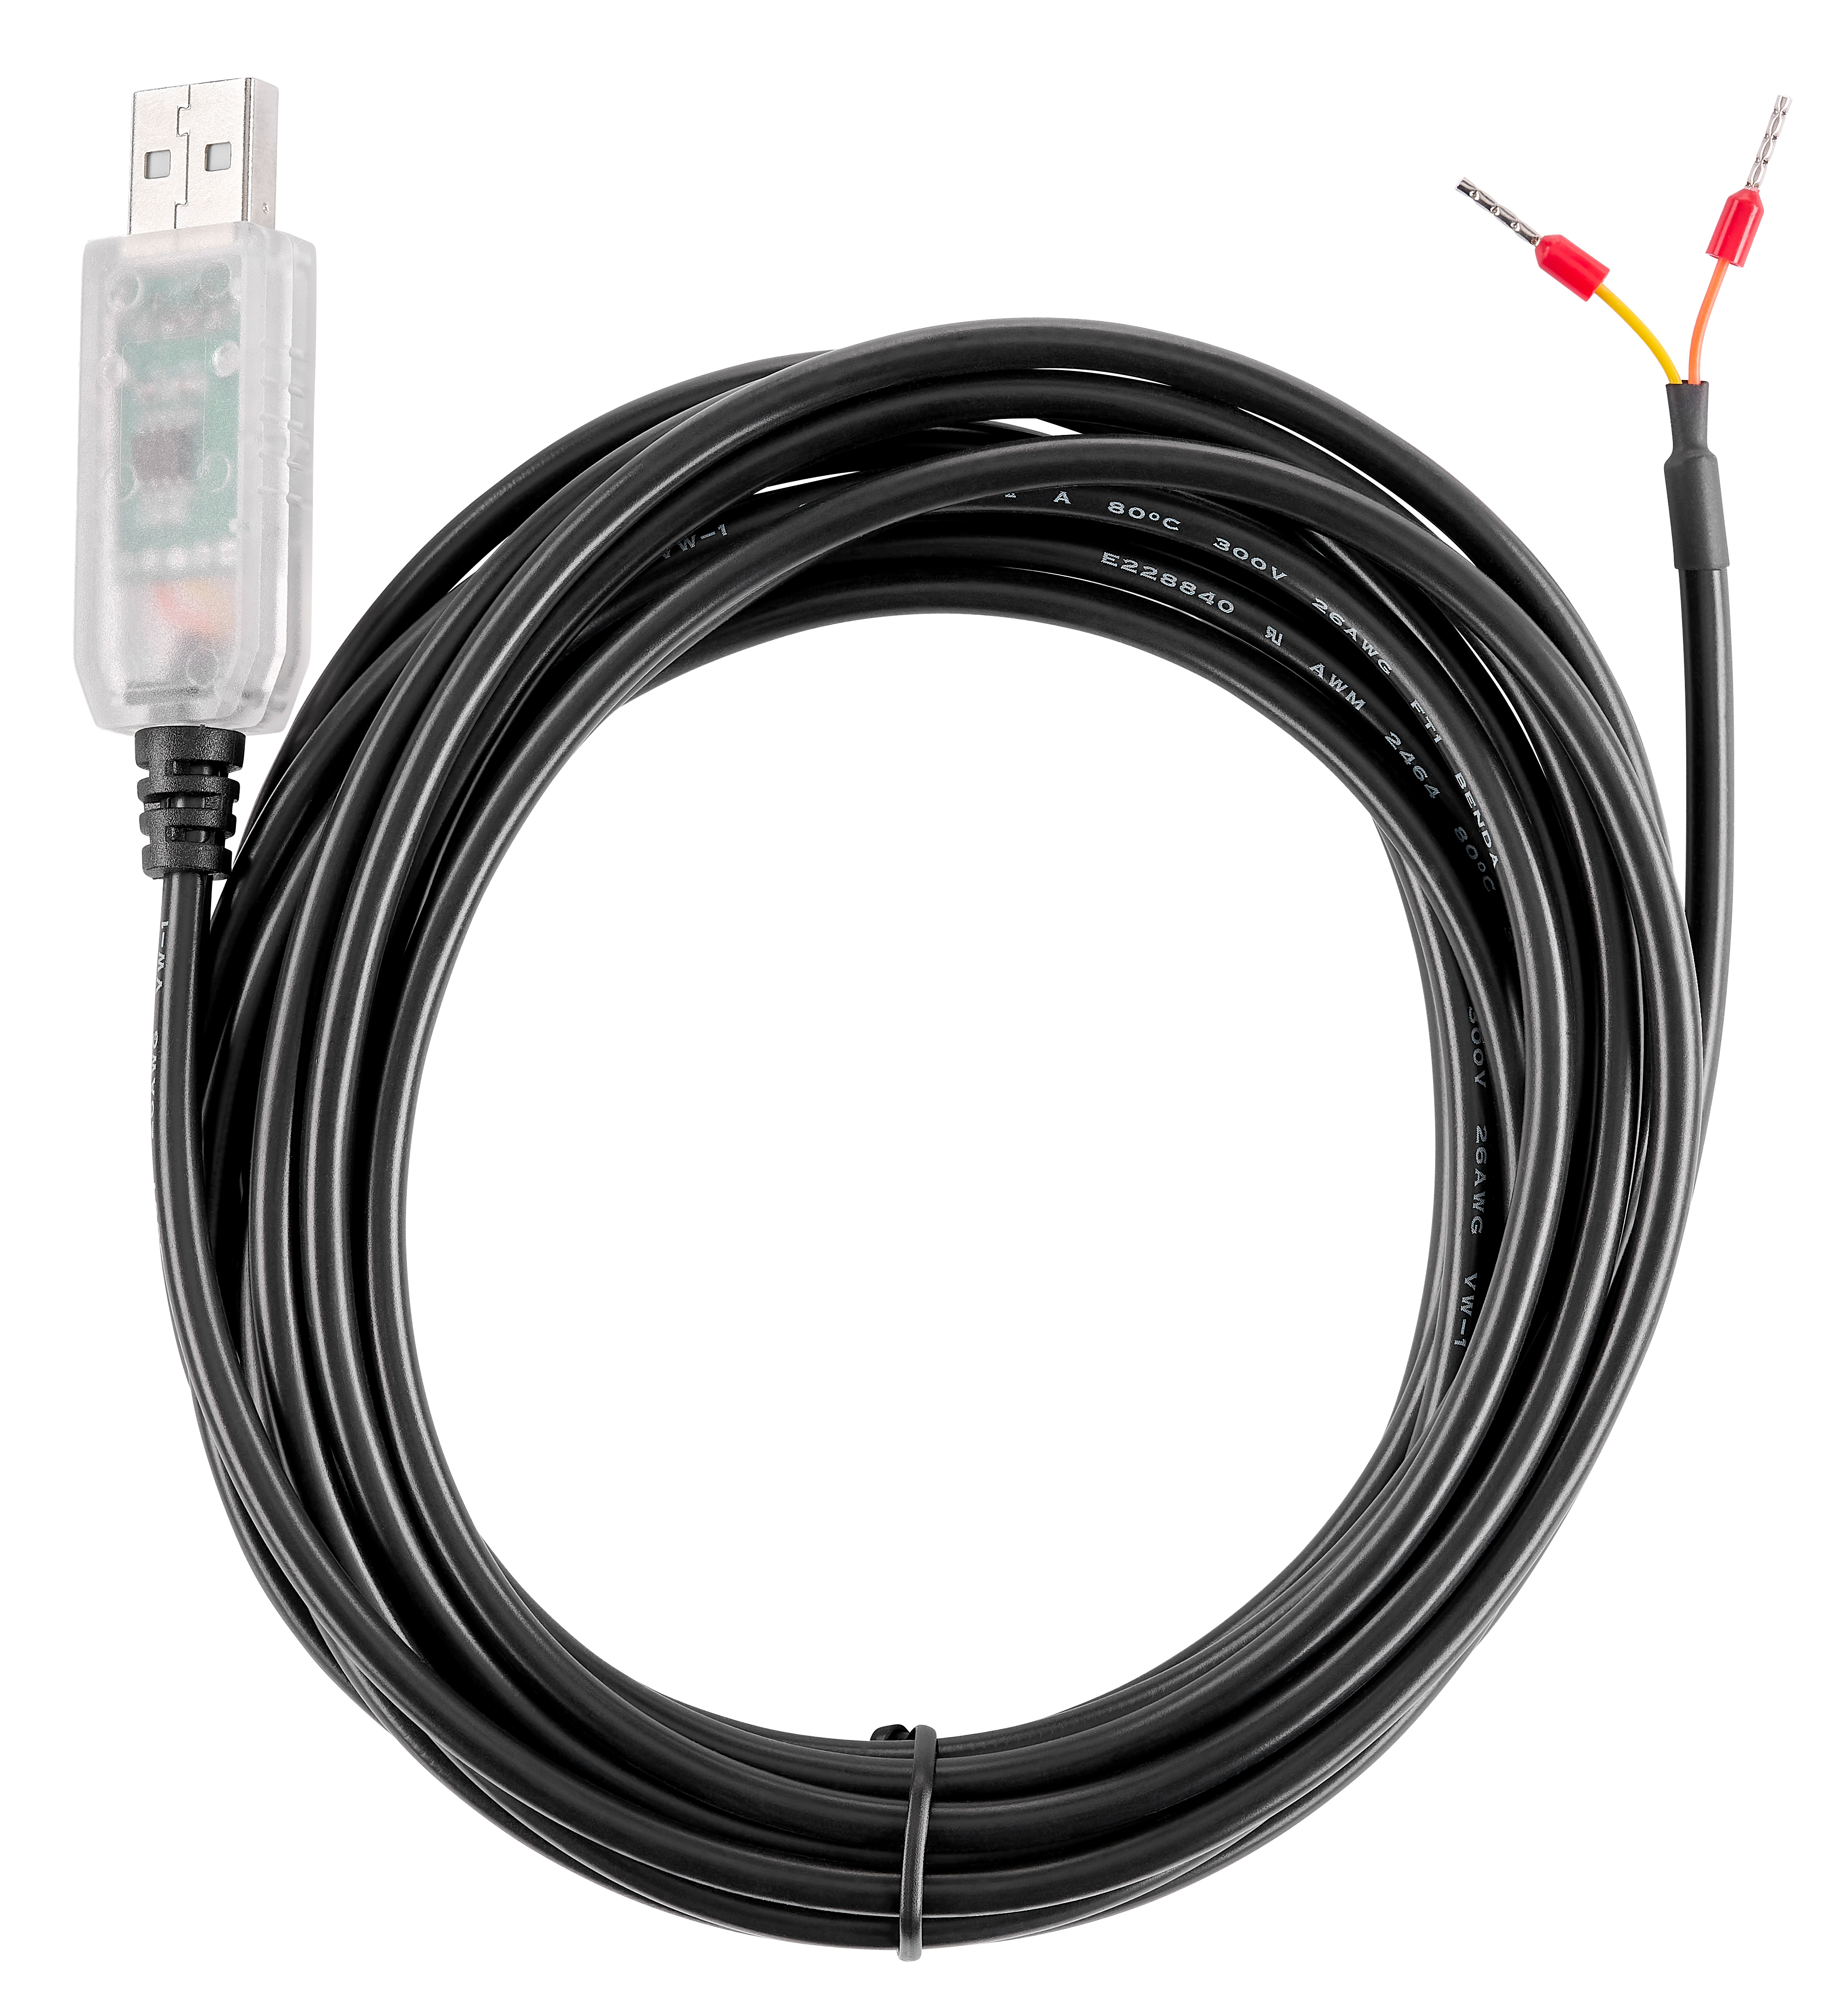 i-CHARGE CONNECT Modul mit 15 m USB-RS485 Kabel